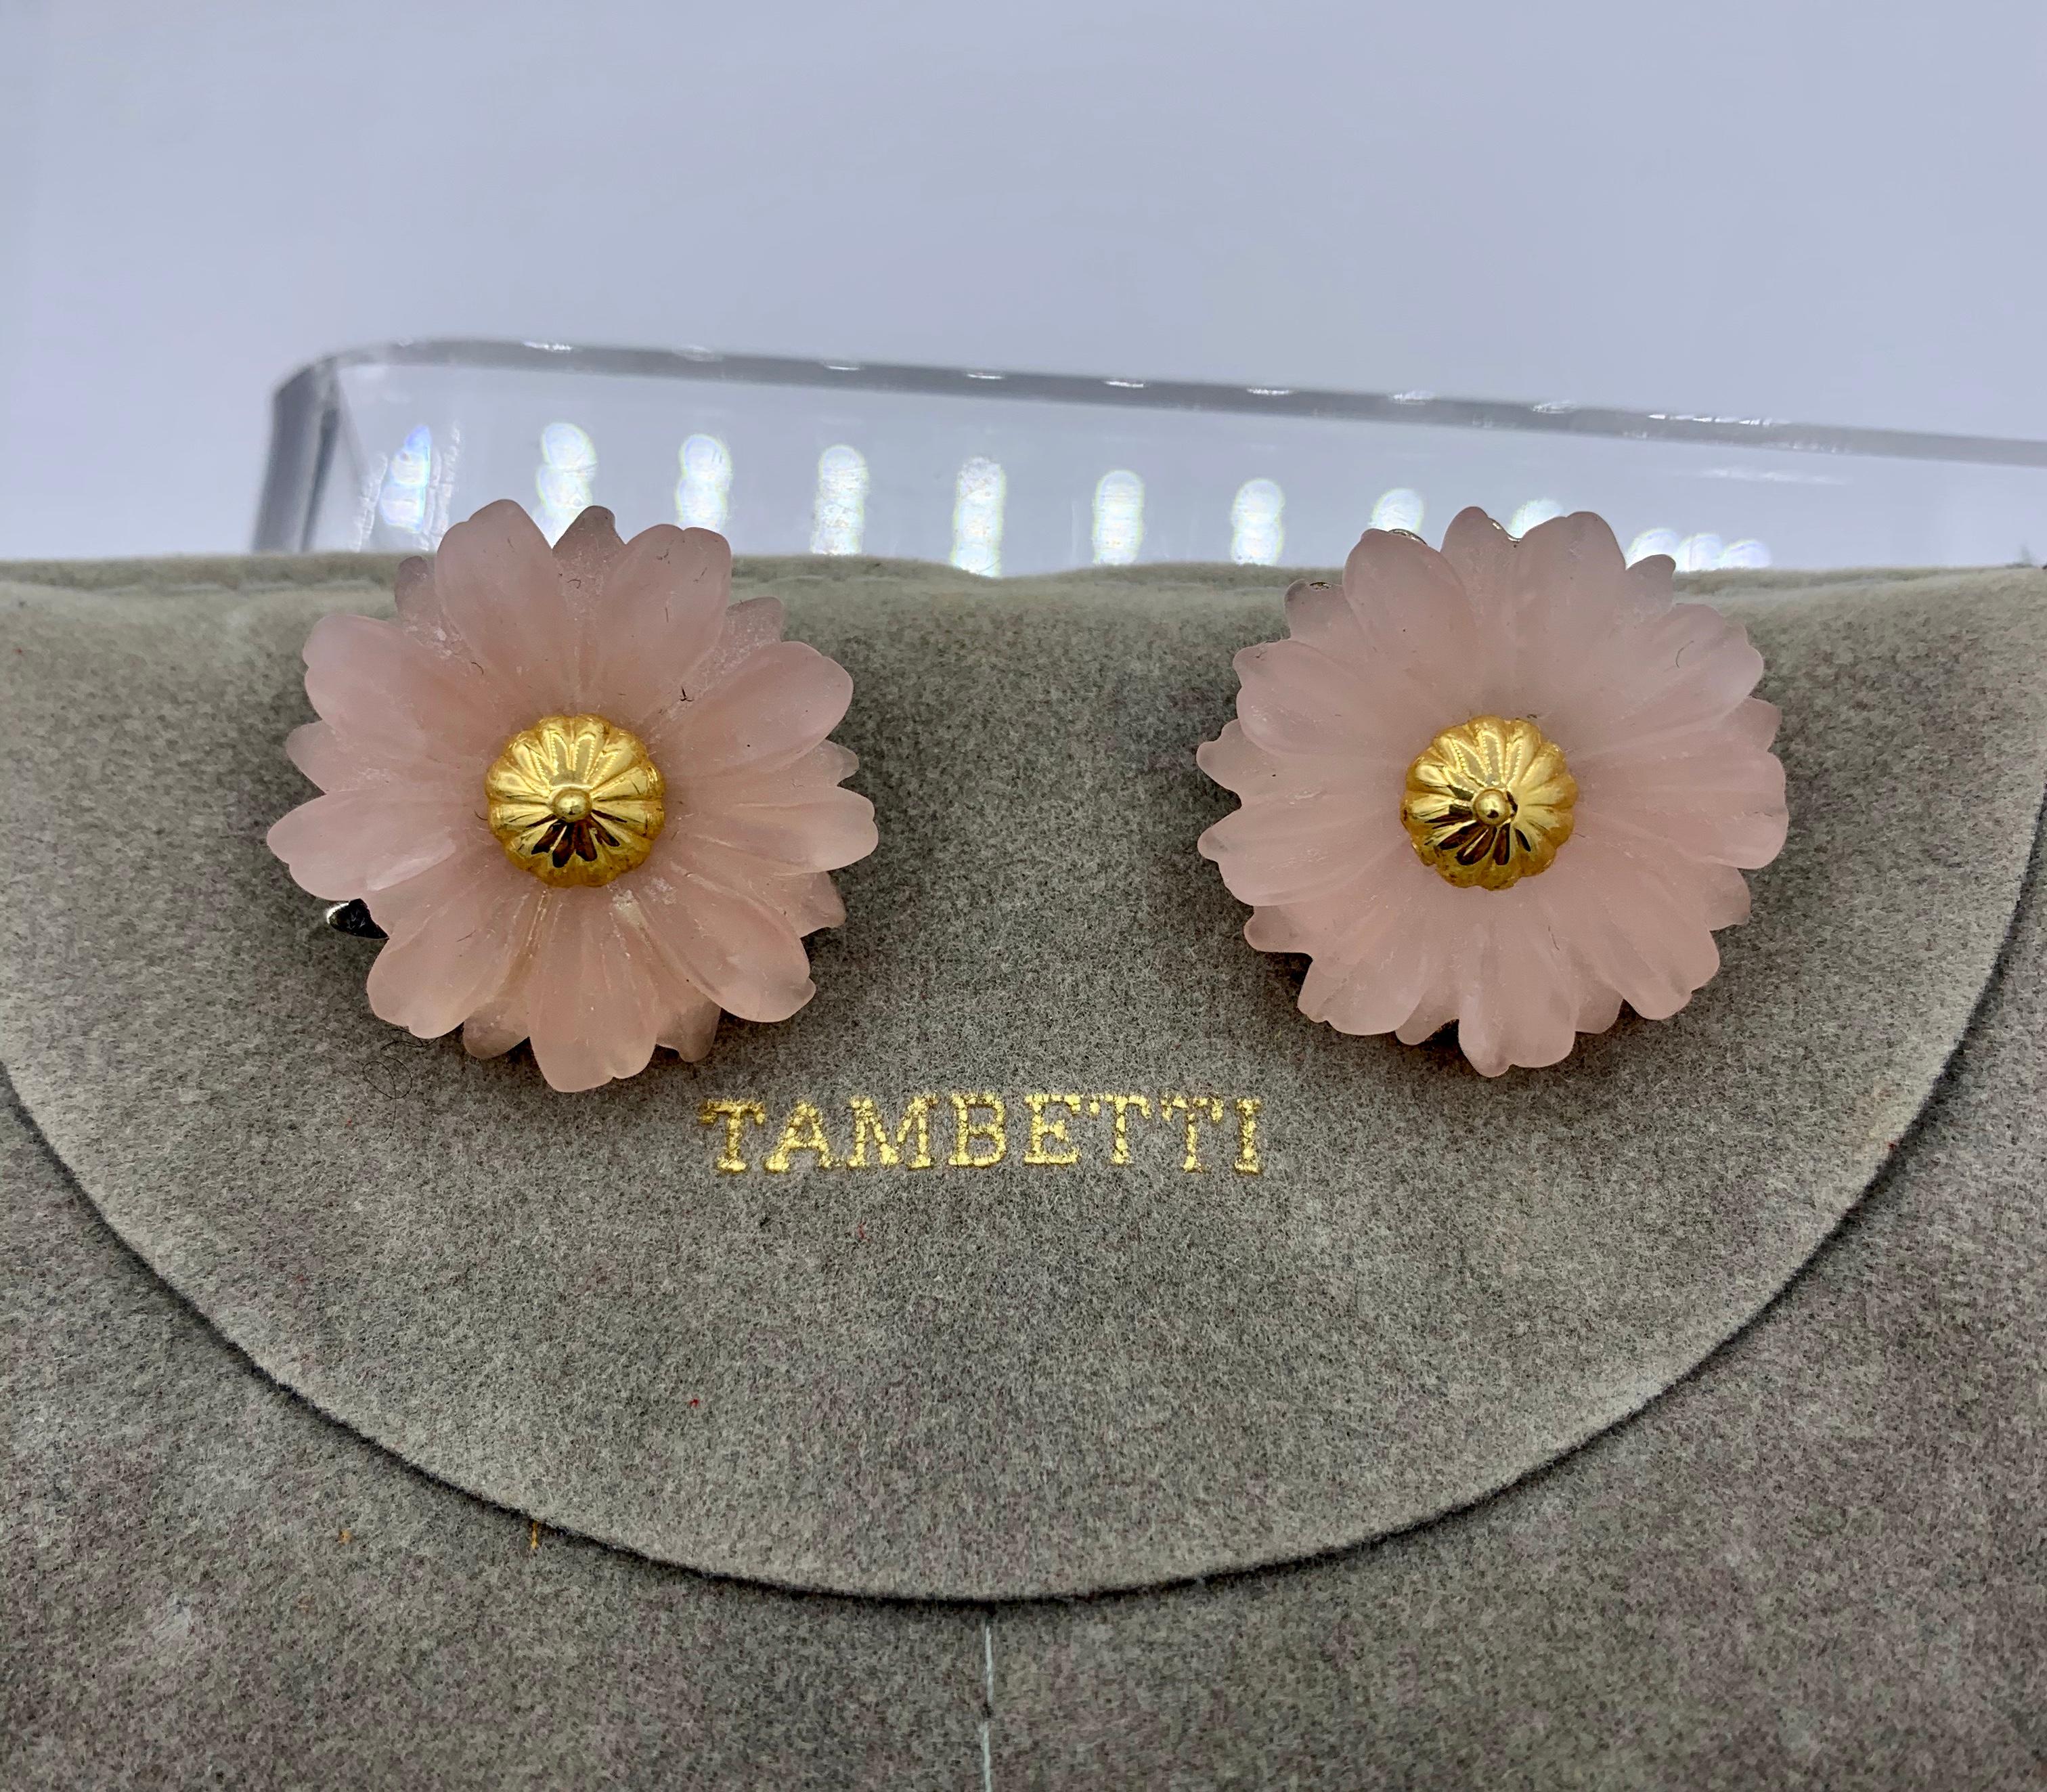 These are stunning signed Tambetti earring earclips in Rose Quartz each designed as a carved pink flower, set in the center with an 18 Karat Gold accent.  The earrings are guaranteed to be from the estate of the renowned British writer Barbara